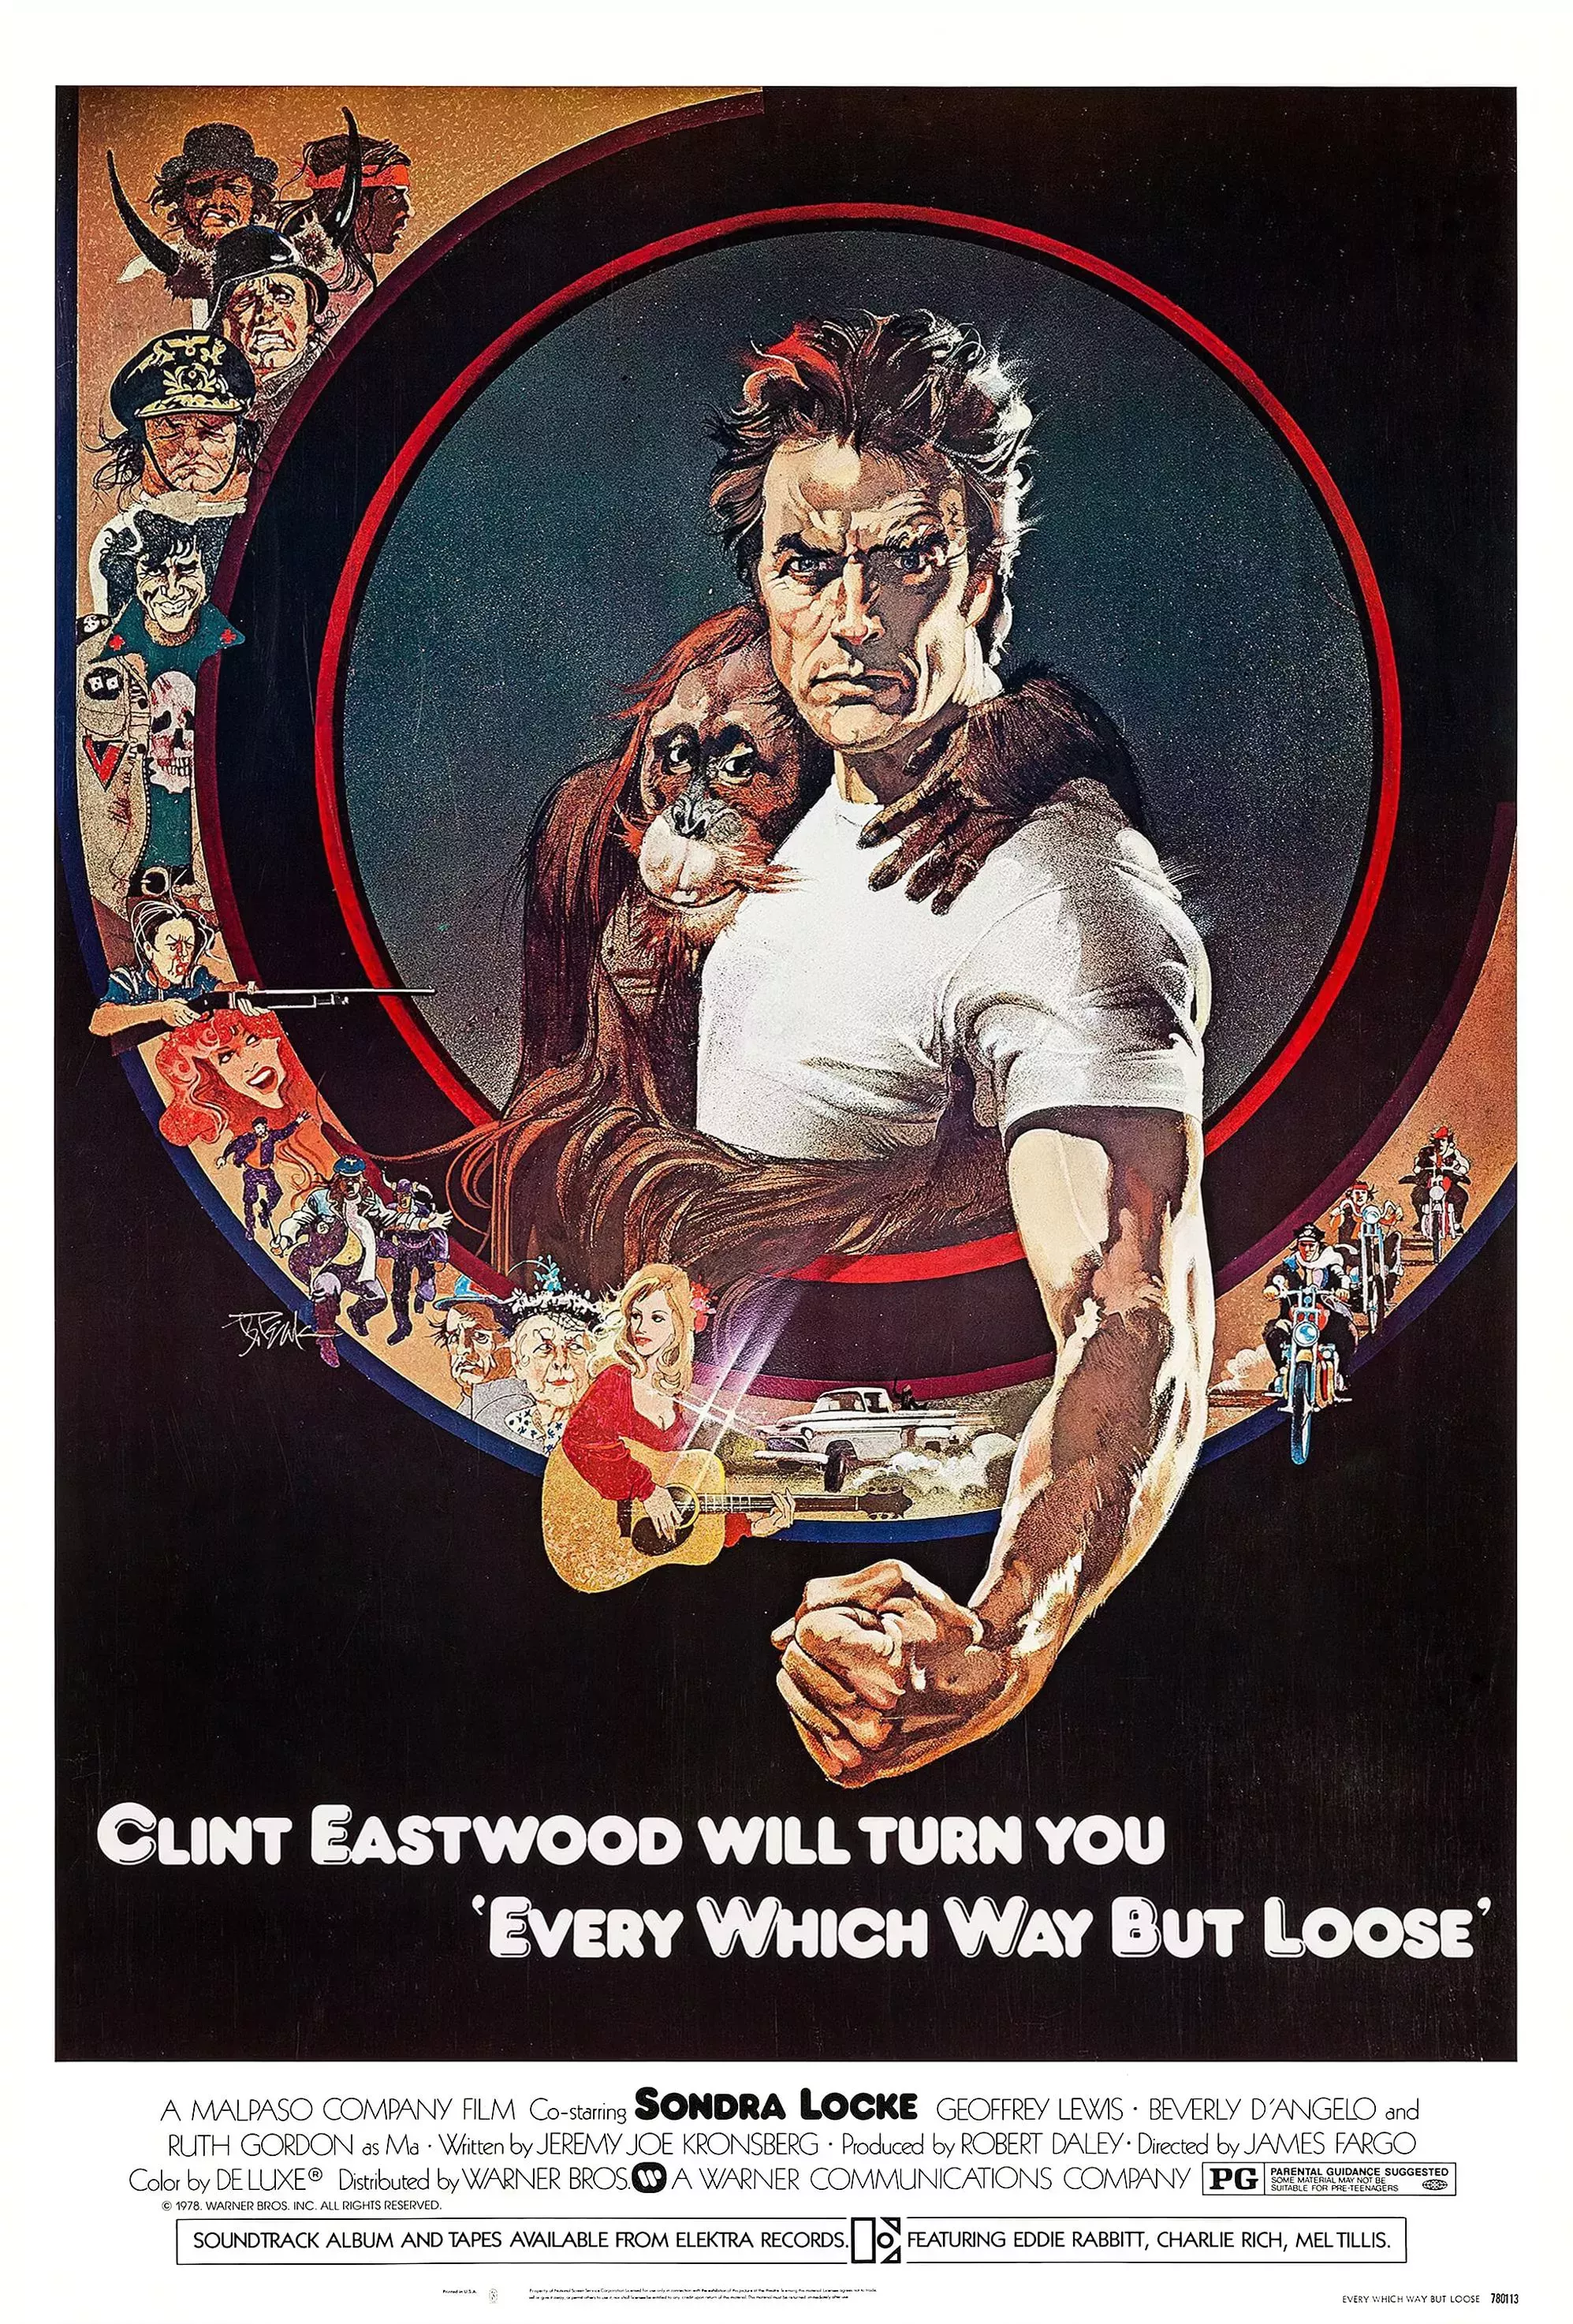 Every Which Way but Loose Film Poster